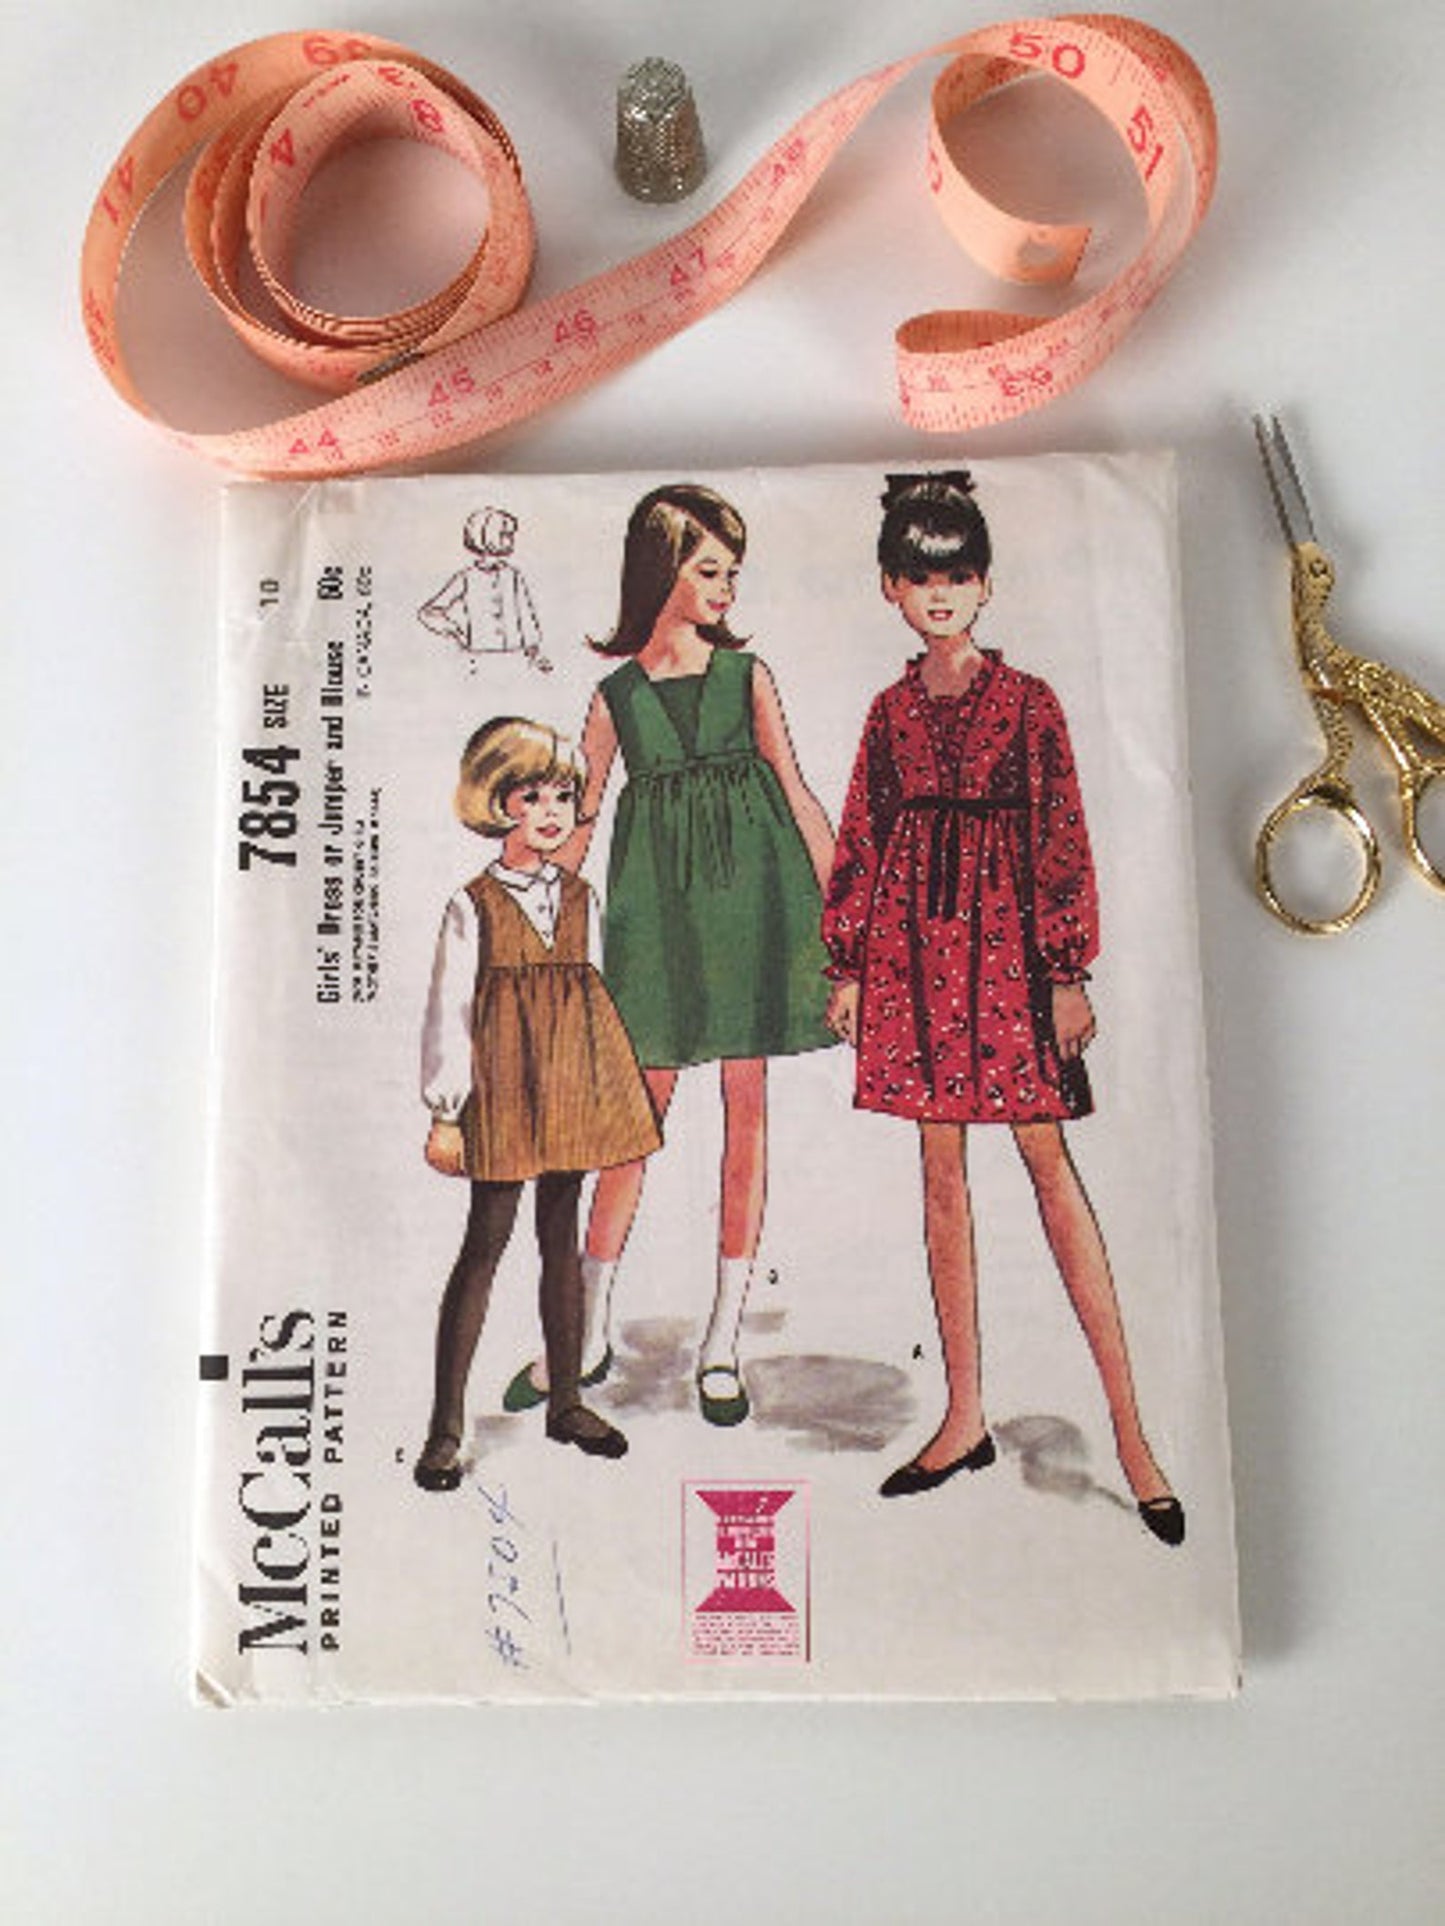 Reproduction Vintage Sewing Patterns: Victorian to 1960s